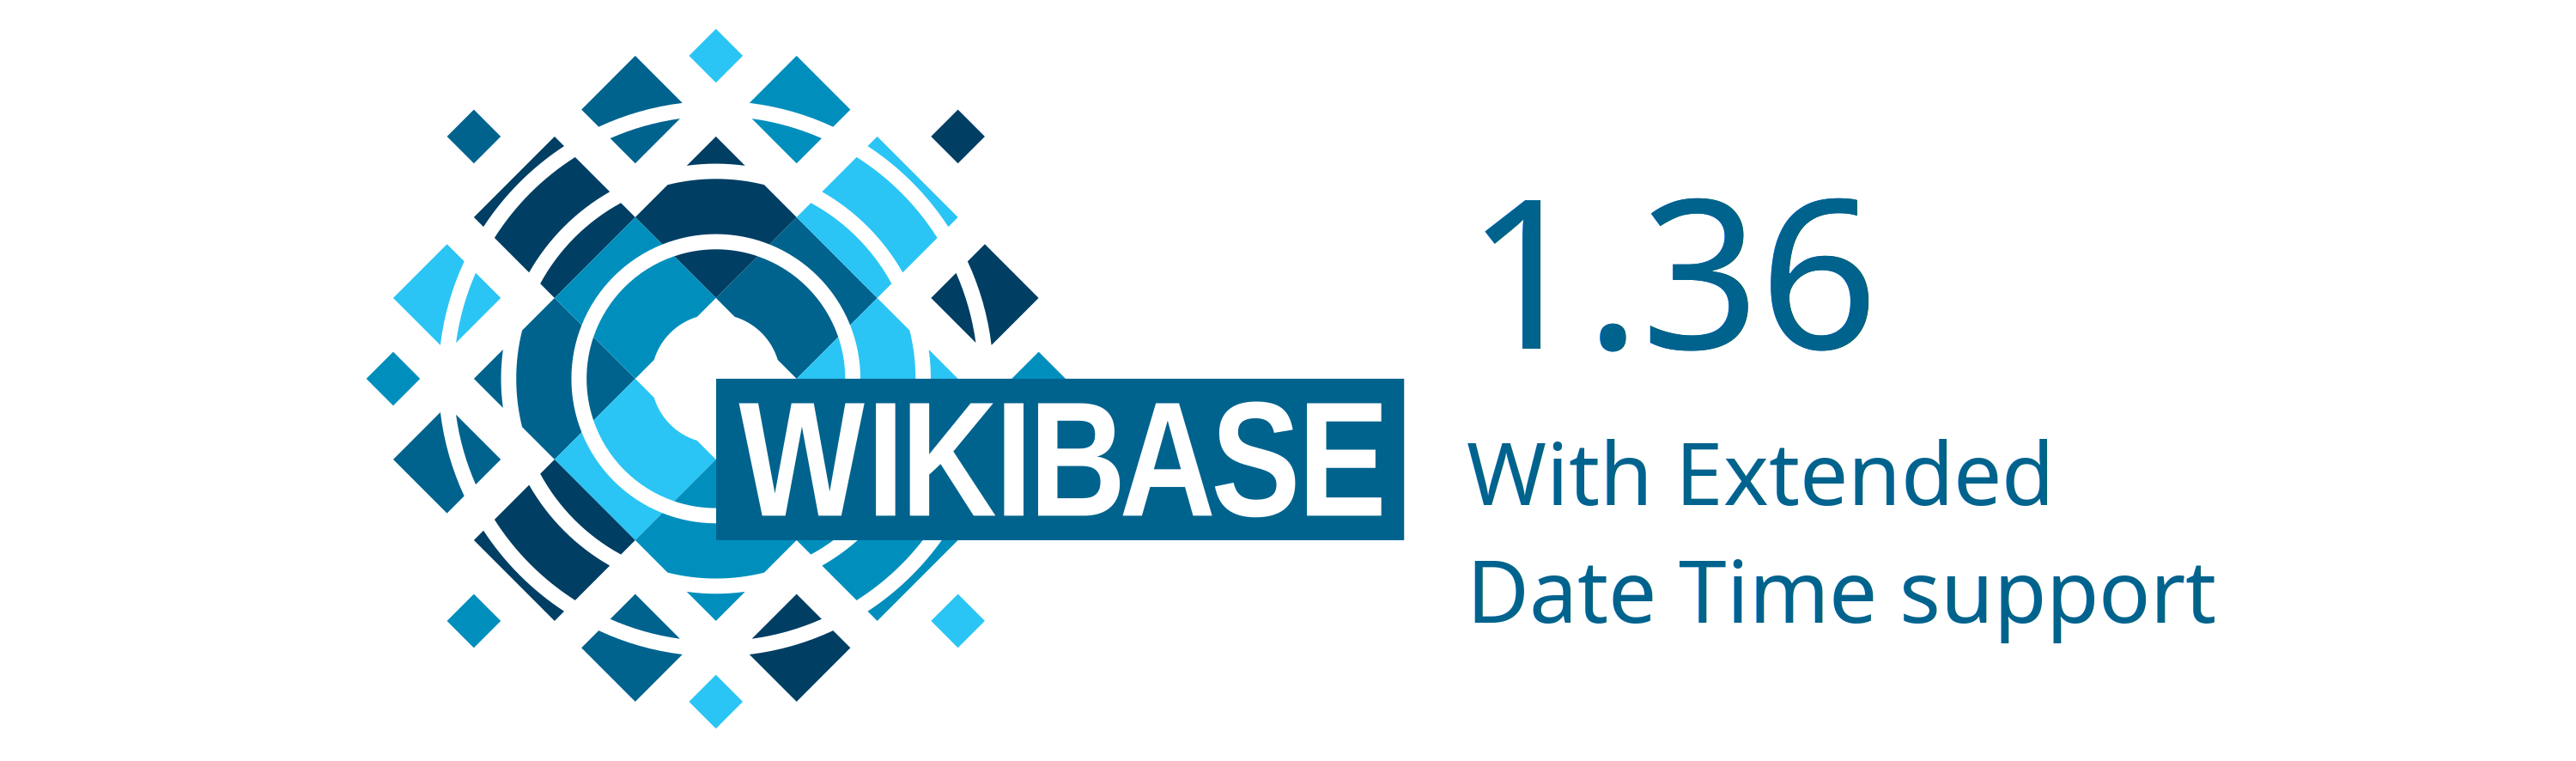 Wikibase 1.36 is now available